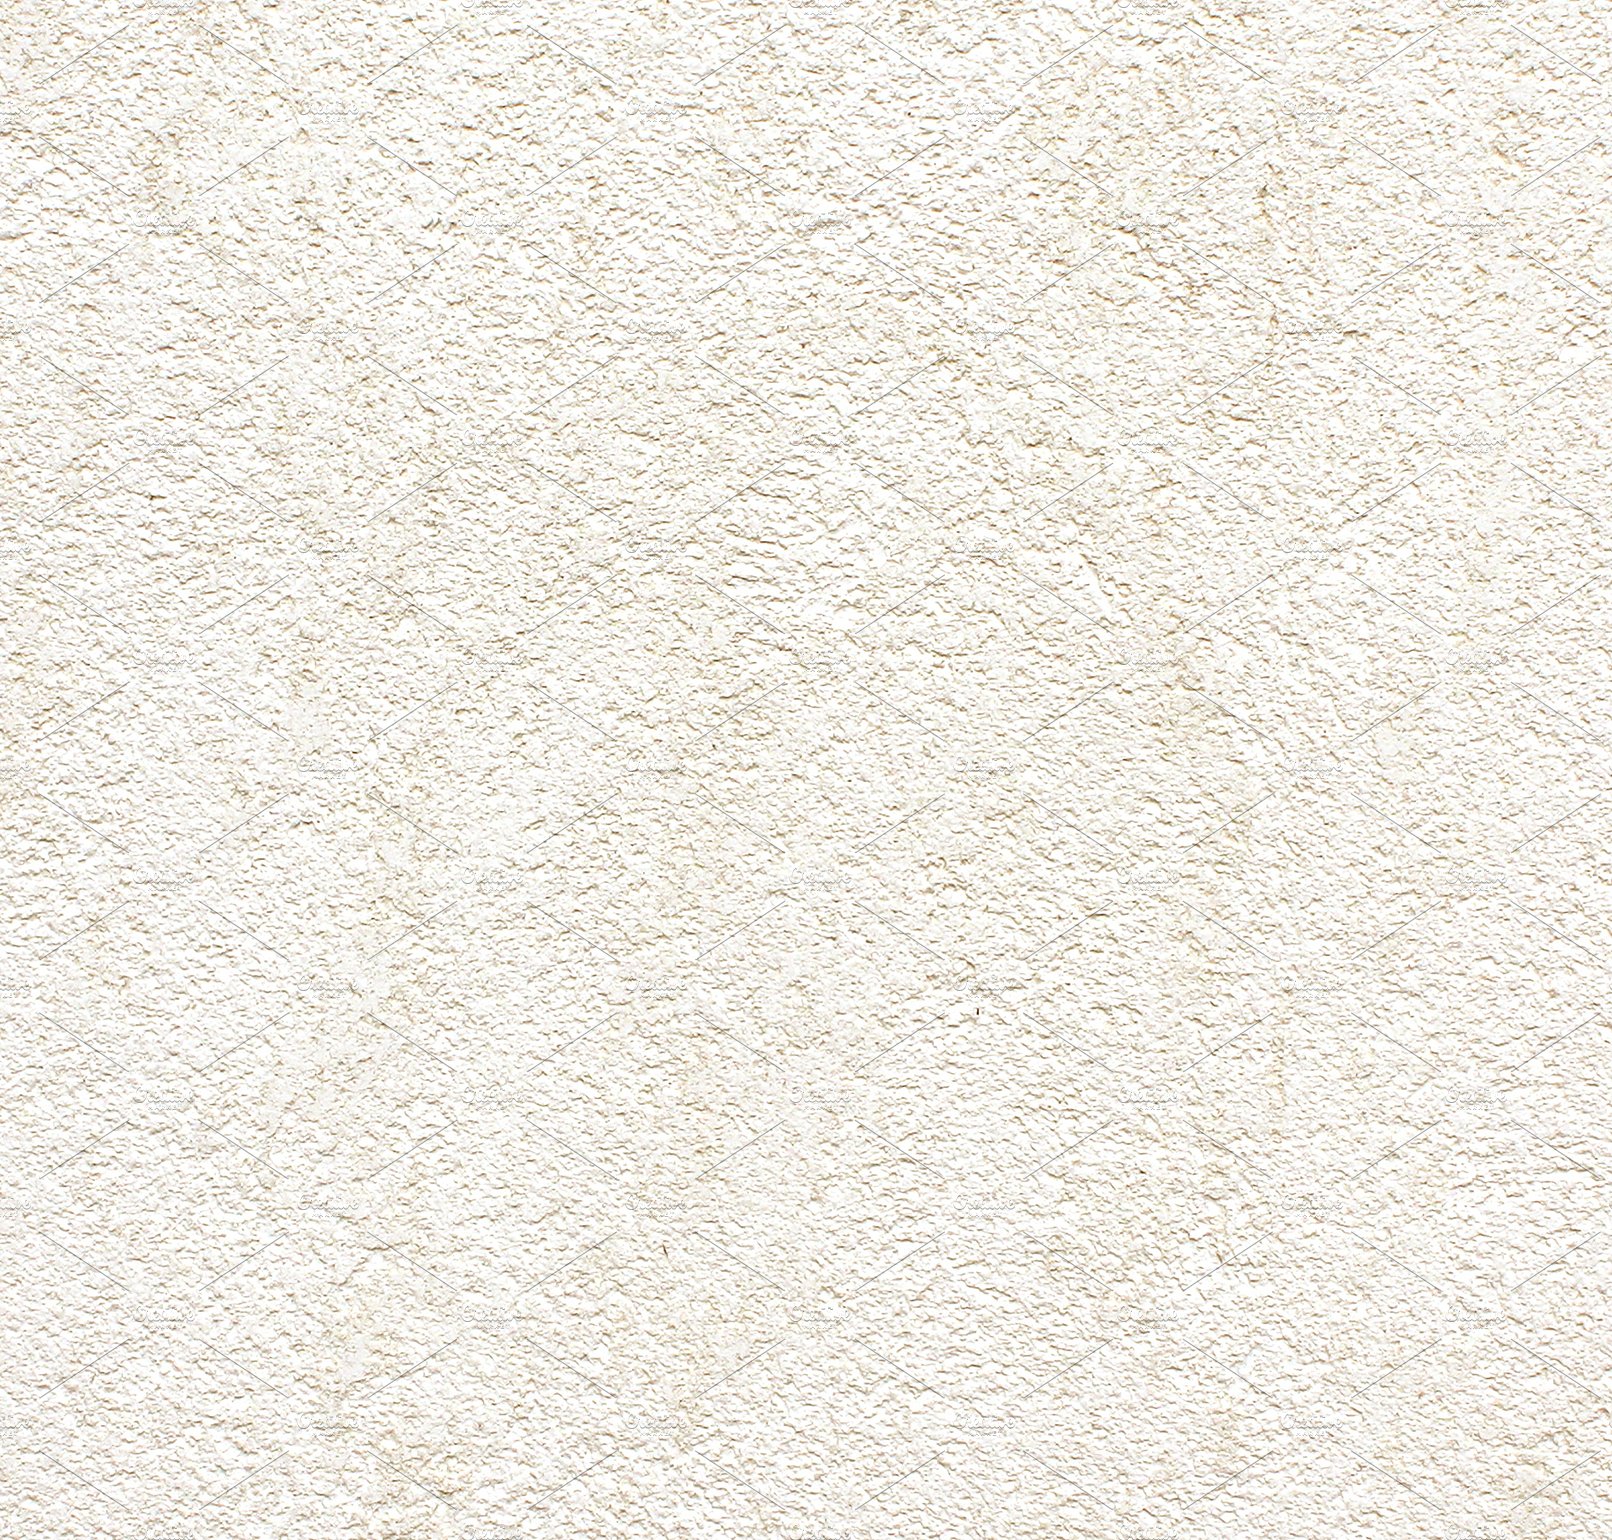 Seamless stucco wall plaster texture cover image.